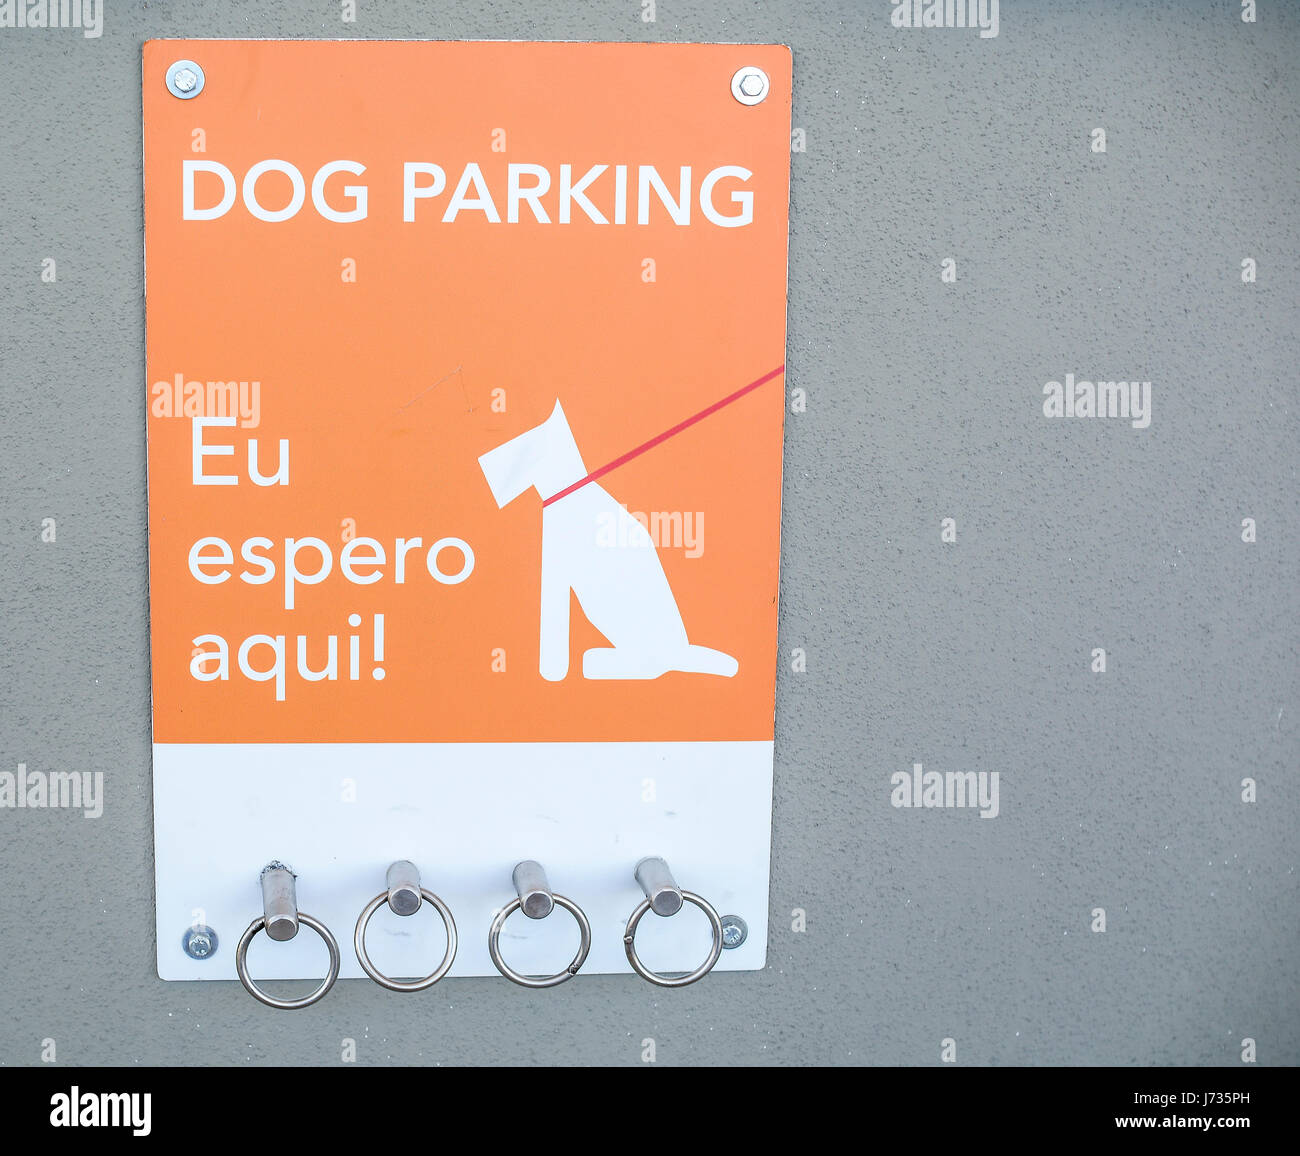 Cute Dog Parking sign - I am waiting here - outside a supermarket Stock Photo